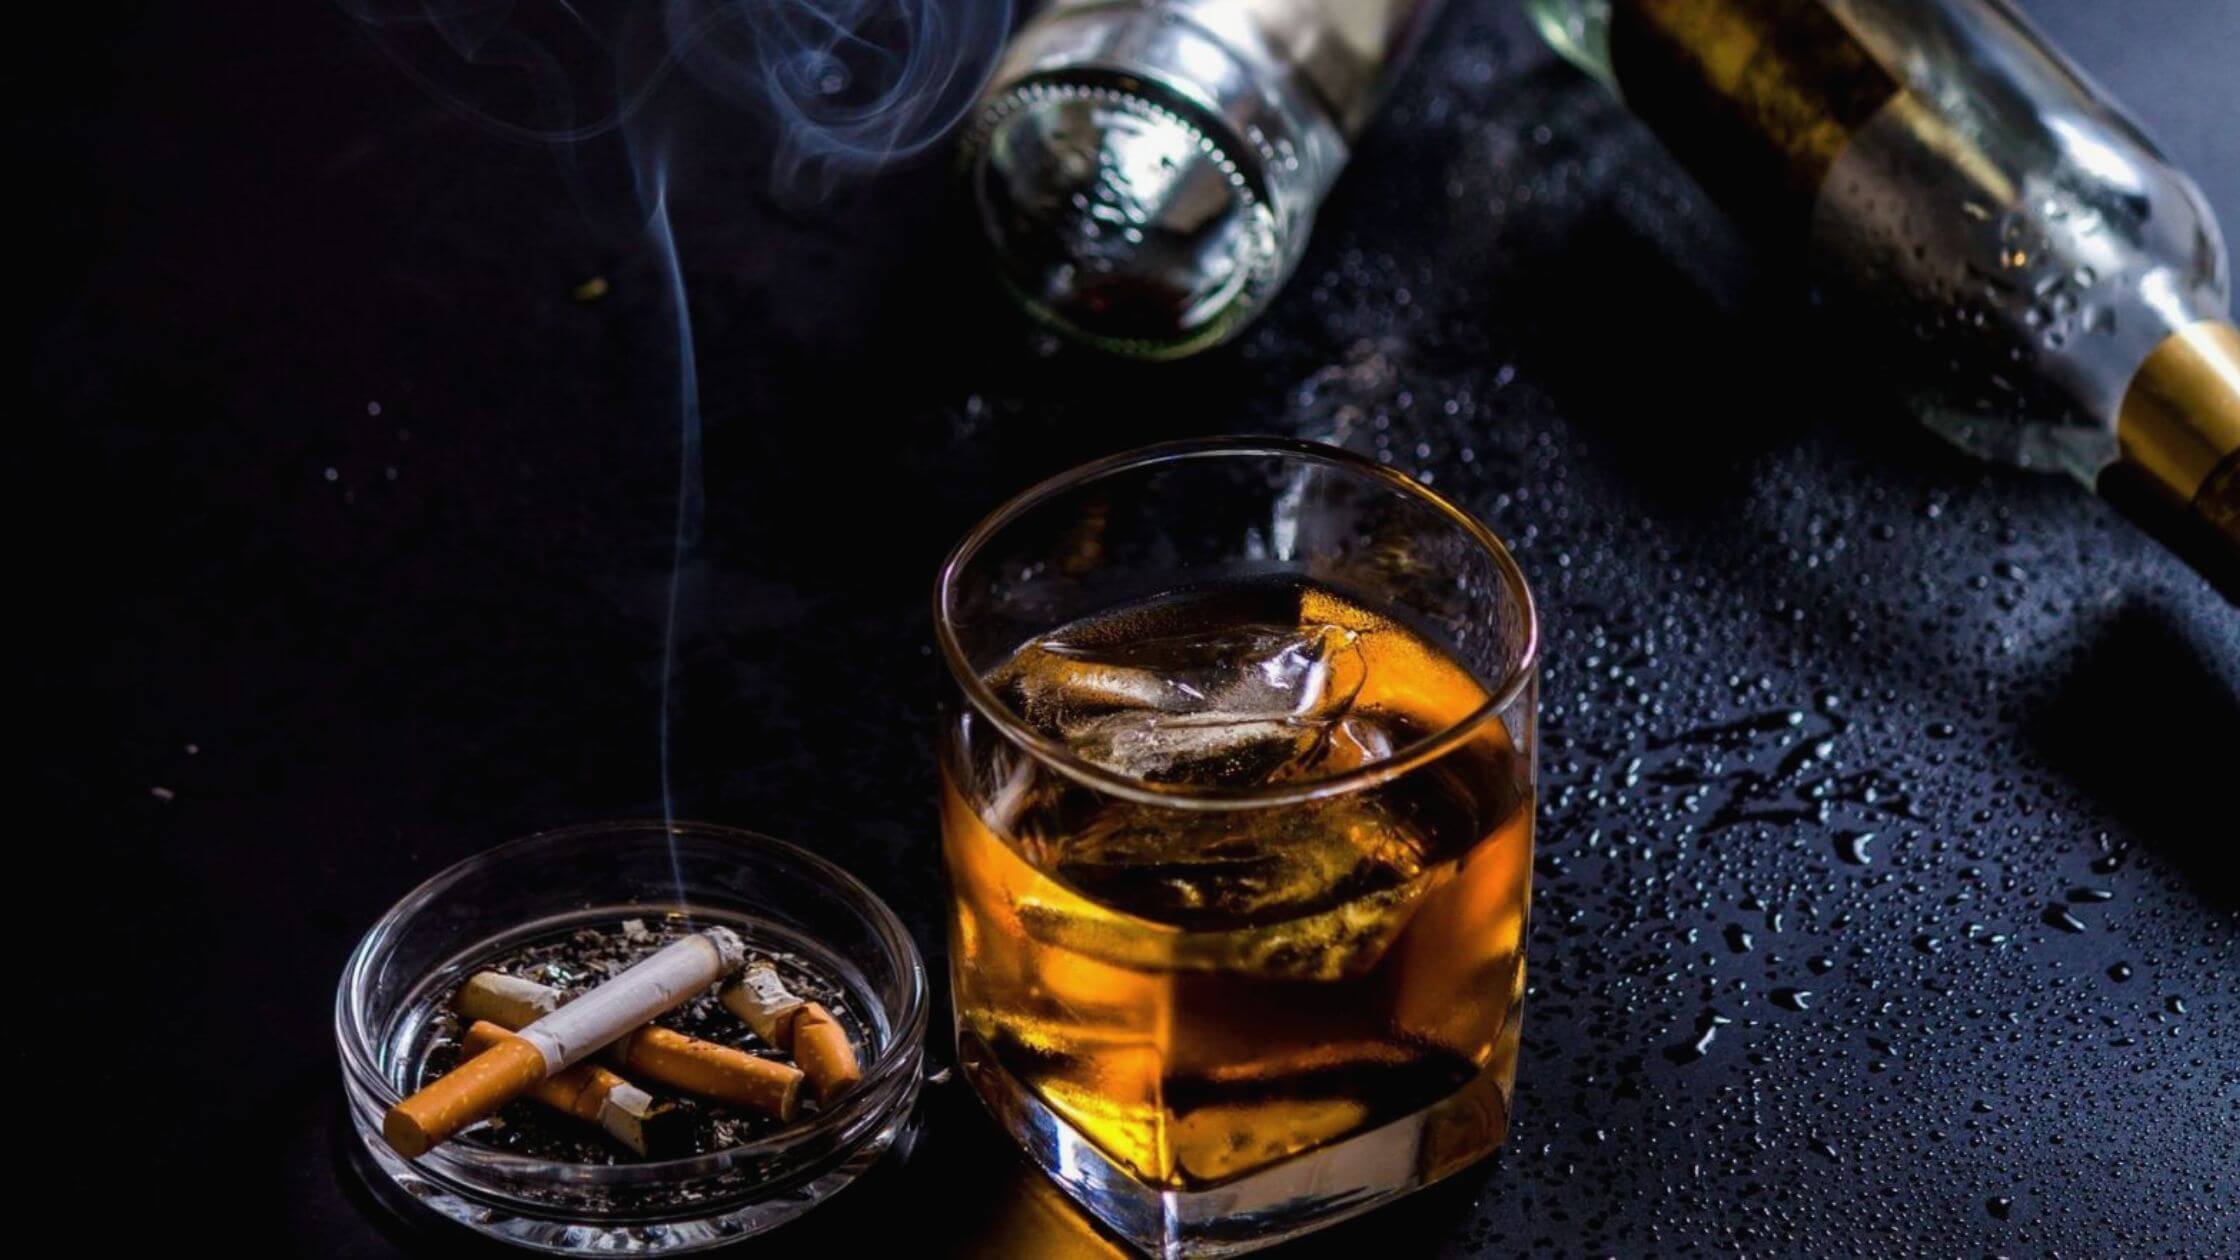 Alcohol & Tobacco Causes About Half Of All Cancer Deaths Worldwide